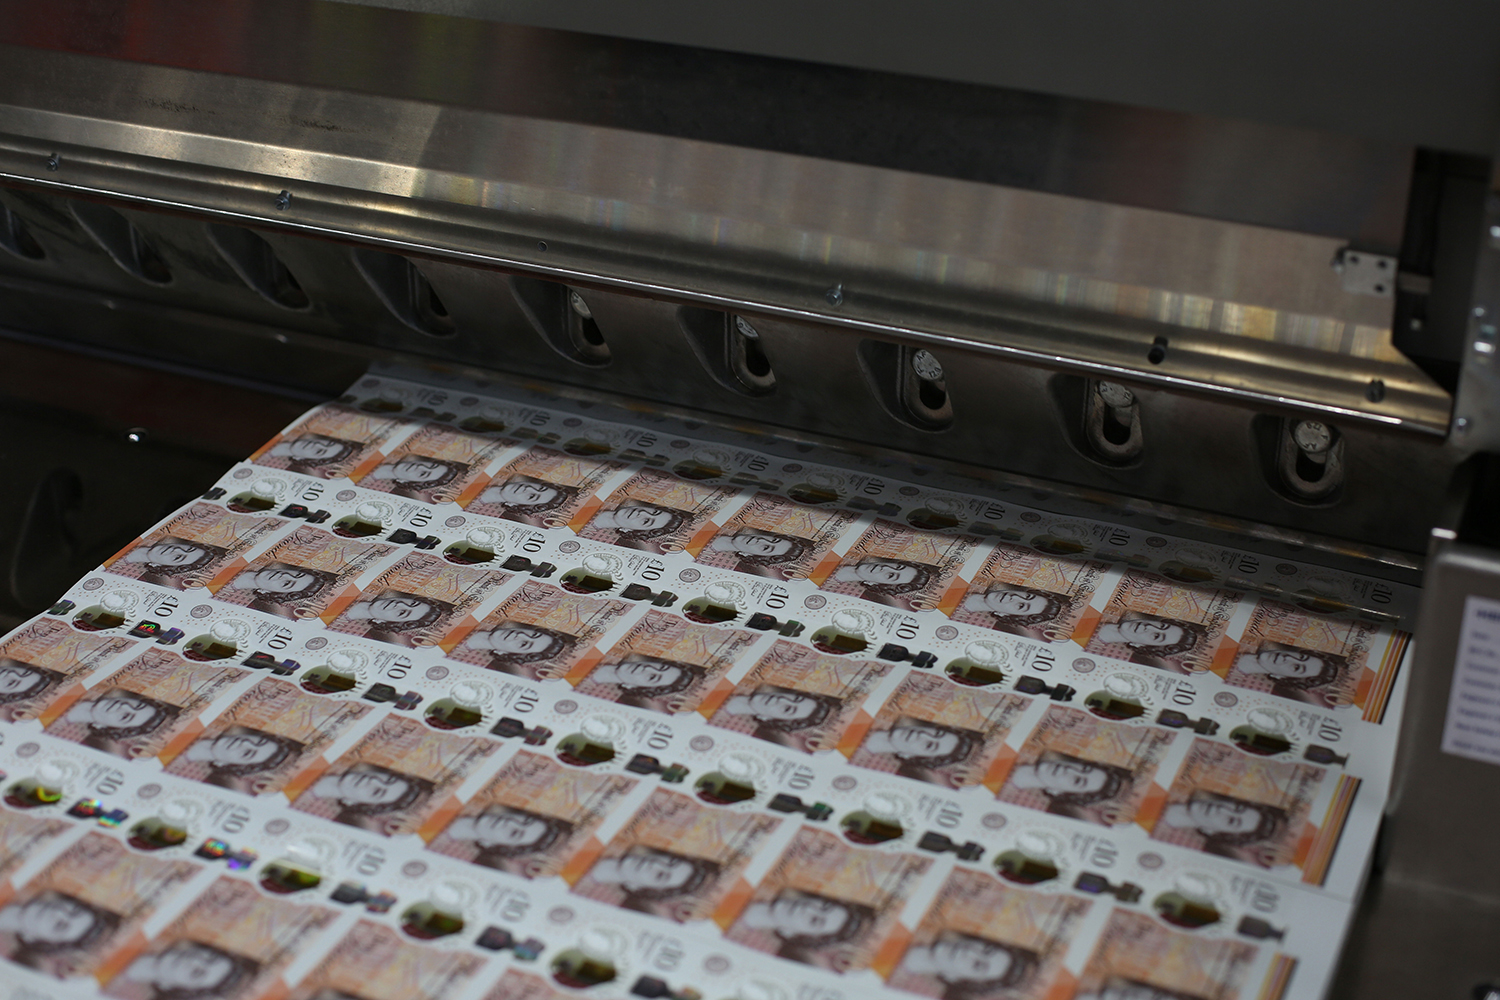 Production of the new £10 note